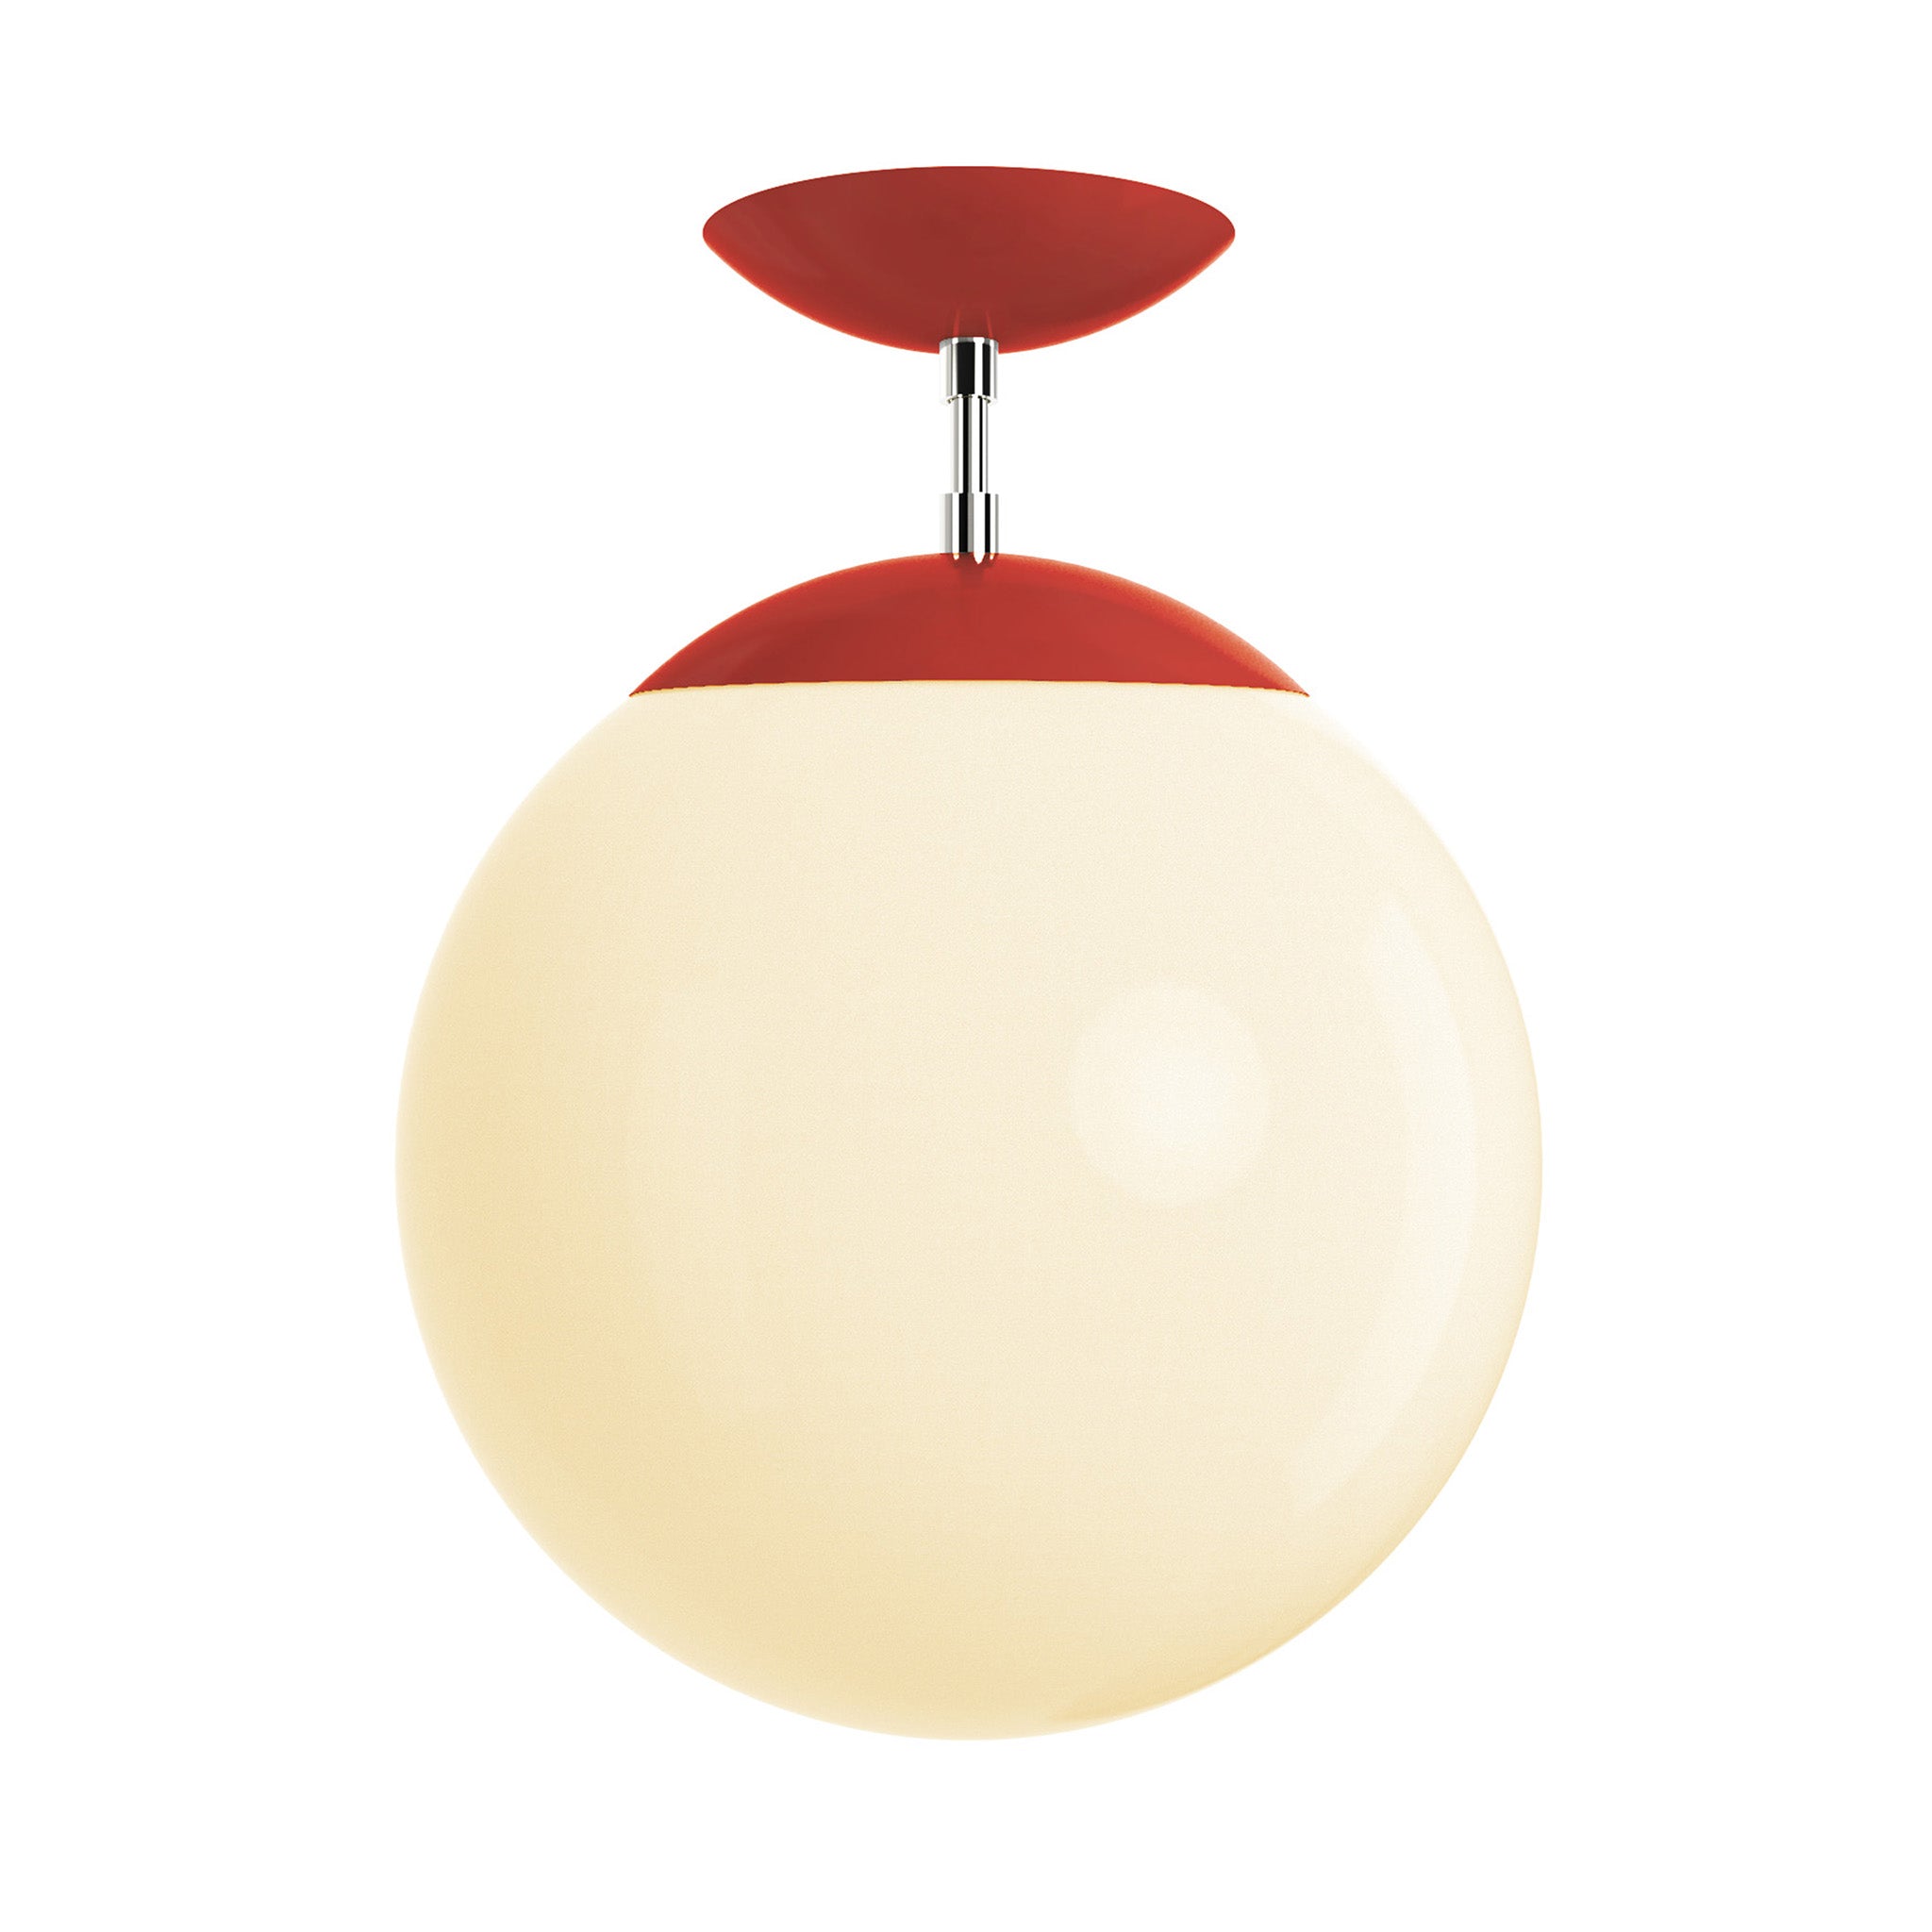 Polished nickel and riding hood red cap white globe flush mount 12" dutton brown lighting